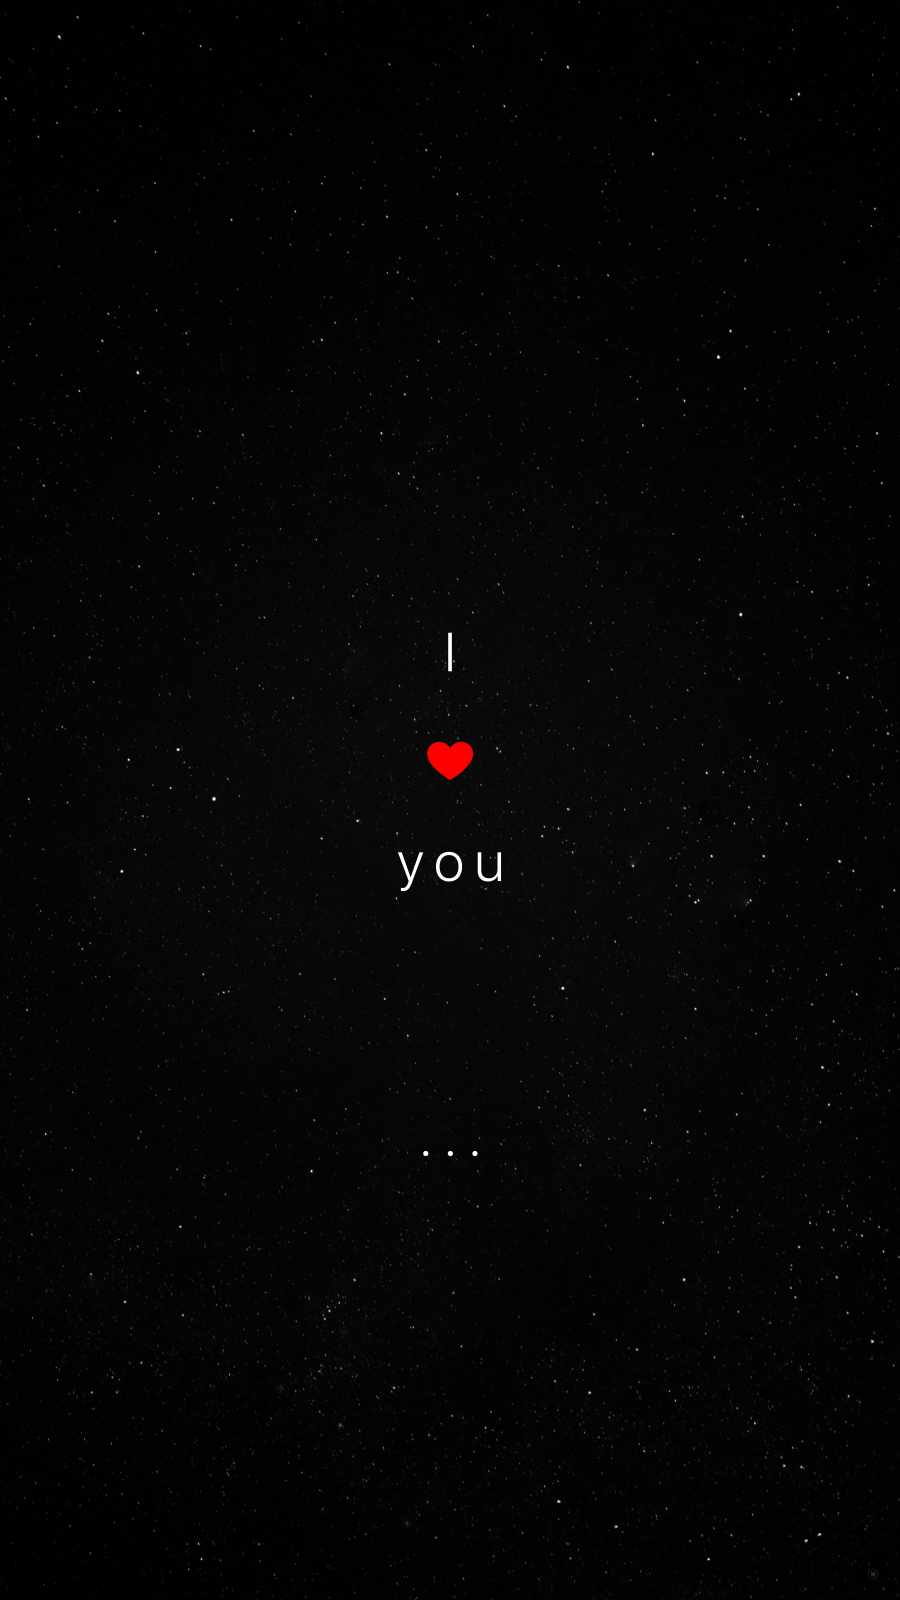 I Love You 4K IPhone Wallpaper - IPhone Wallpapers : iPhone Wallpapers